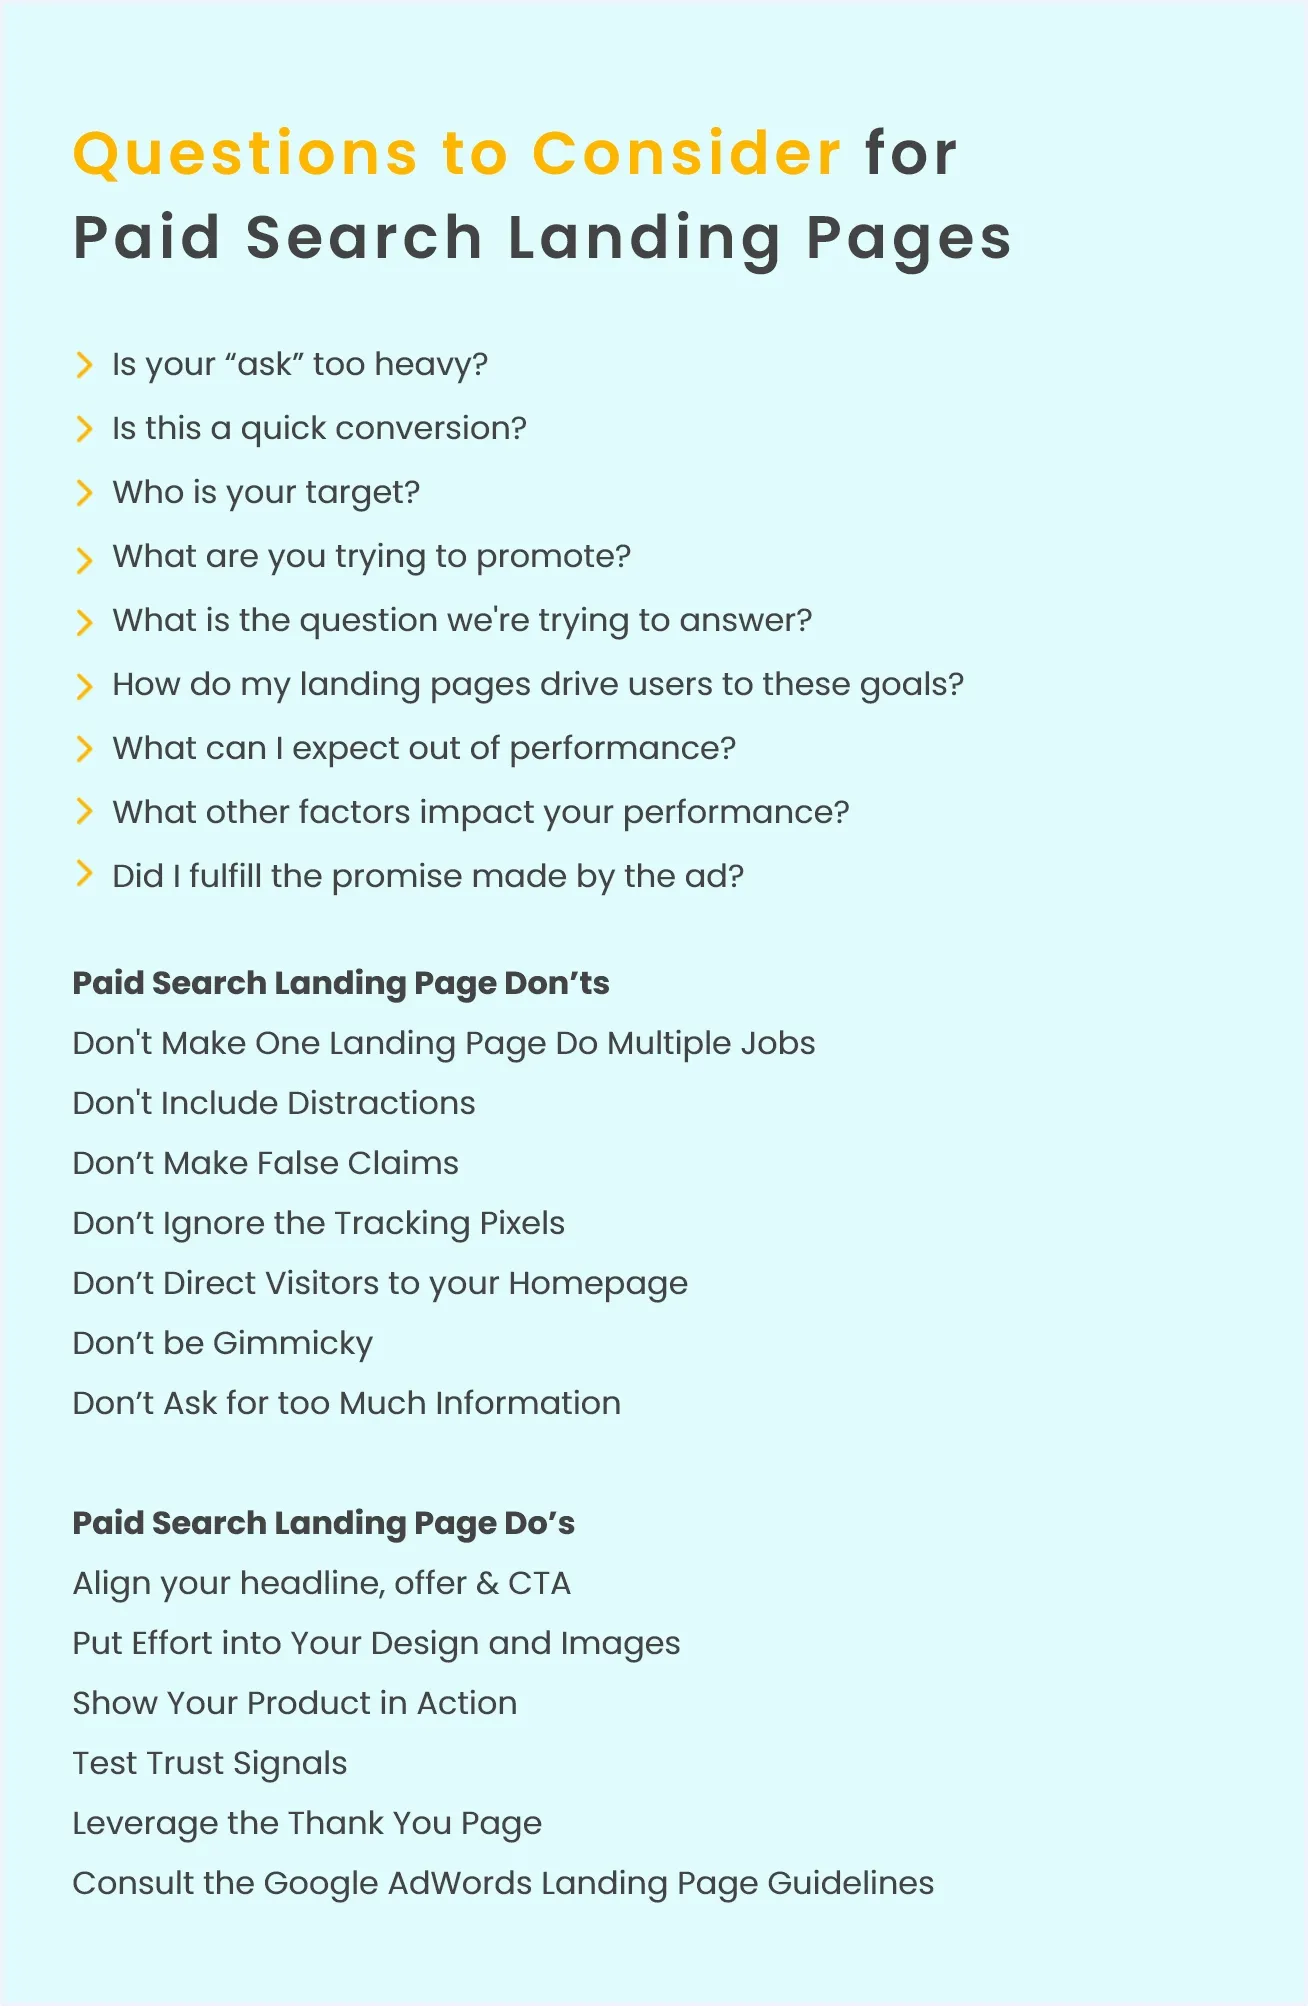 dos-and-don'ts-to-consider-for-a-paid-search-landing-page-11.webp